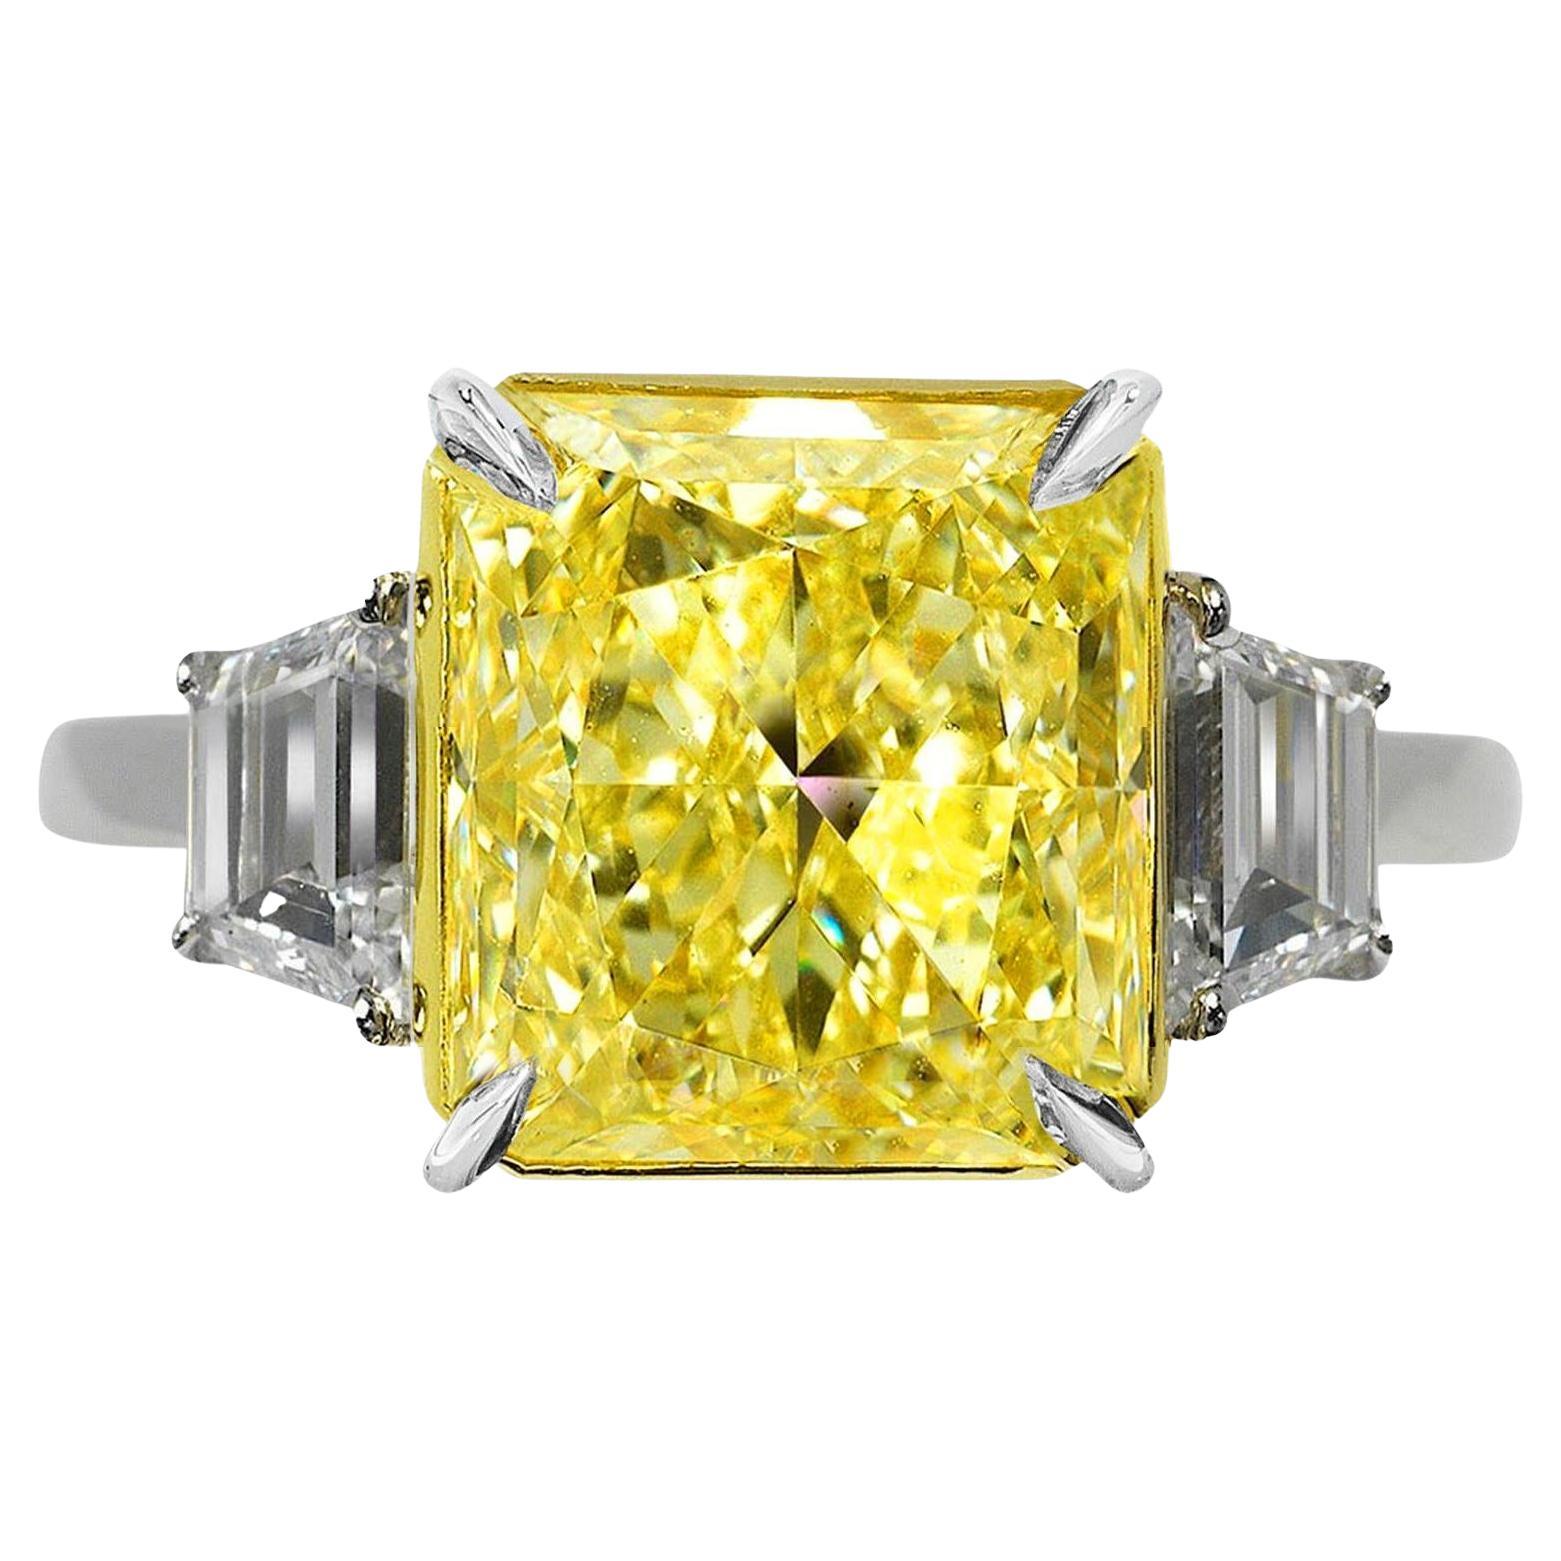 GIA Certified 7 Carat Fancy Intense Yellow Radiant Diamond Ring For Sale